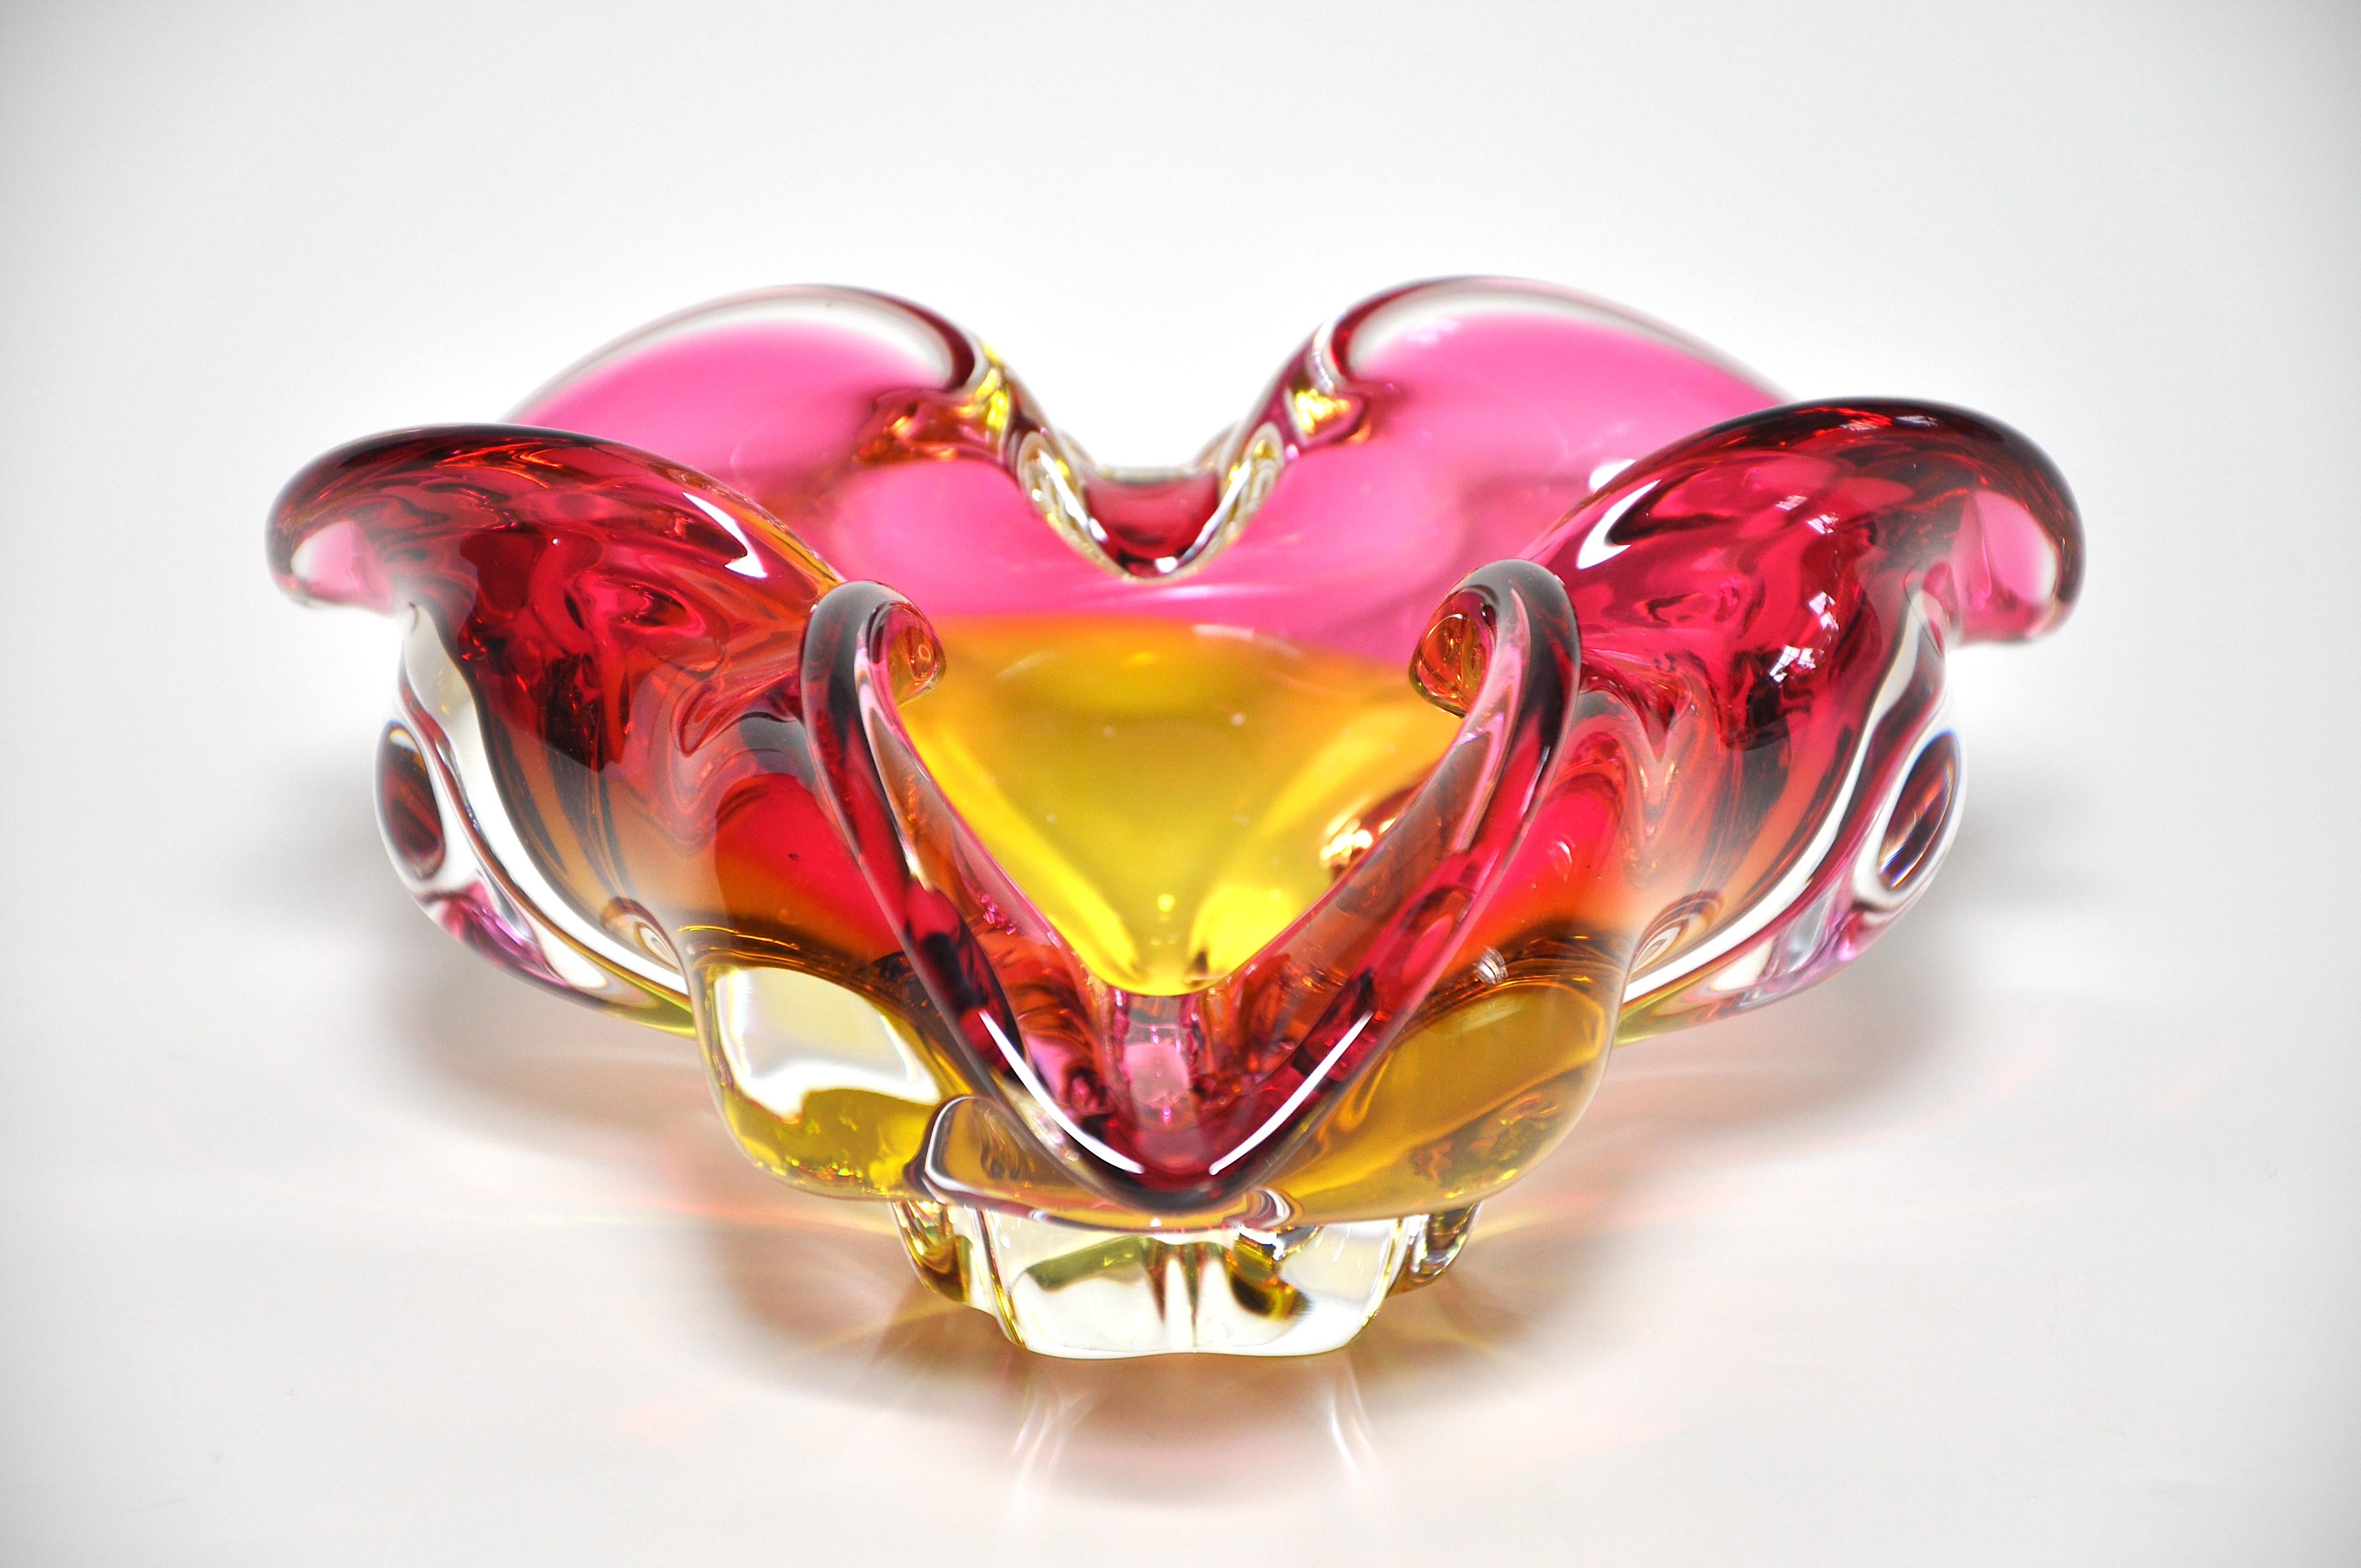 Title:
Stunning Vintage Pink Yellow Art Glass Bowl Italian 

Description:
A stunning vintage piece of art glass in a strong pink and molten yellow. This piece is wonderful as it would look great matched with antique or Mid-Century Modern furniture